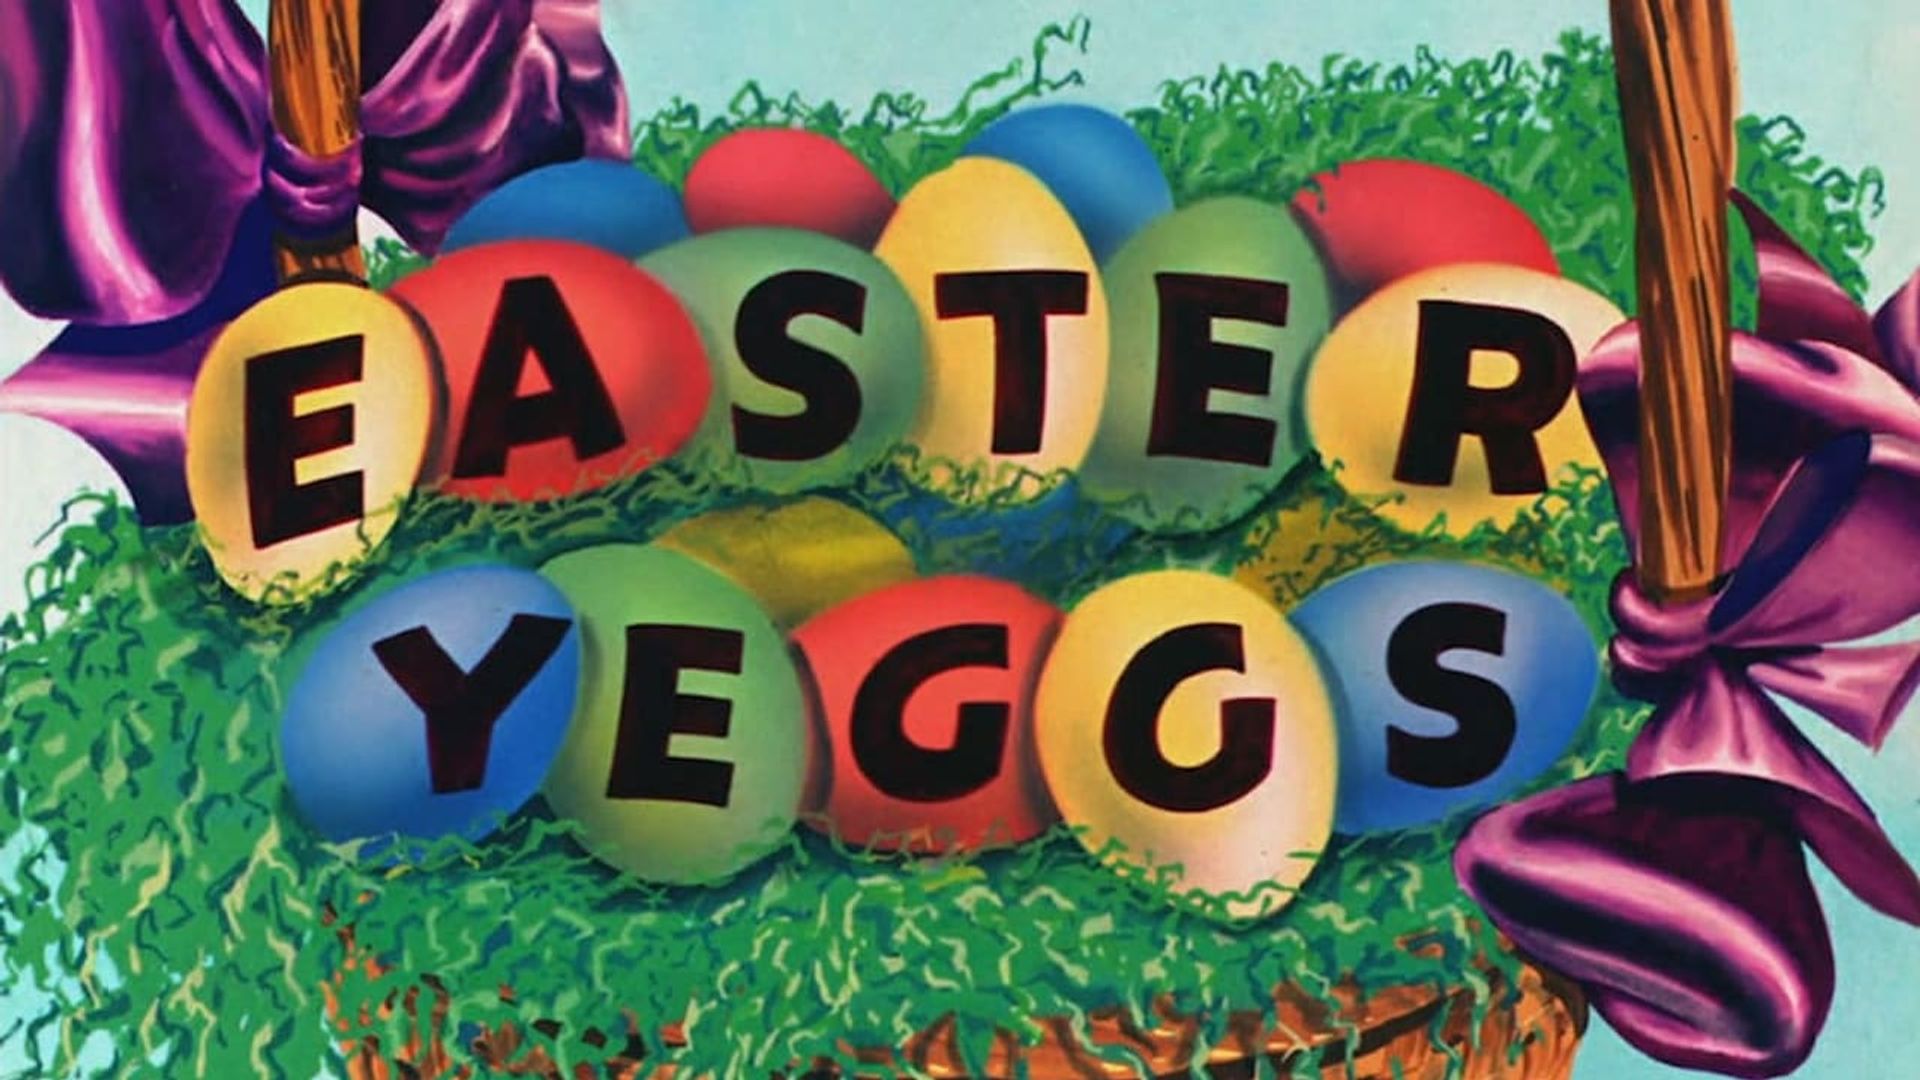 Easter Yeggs background